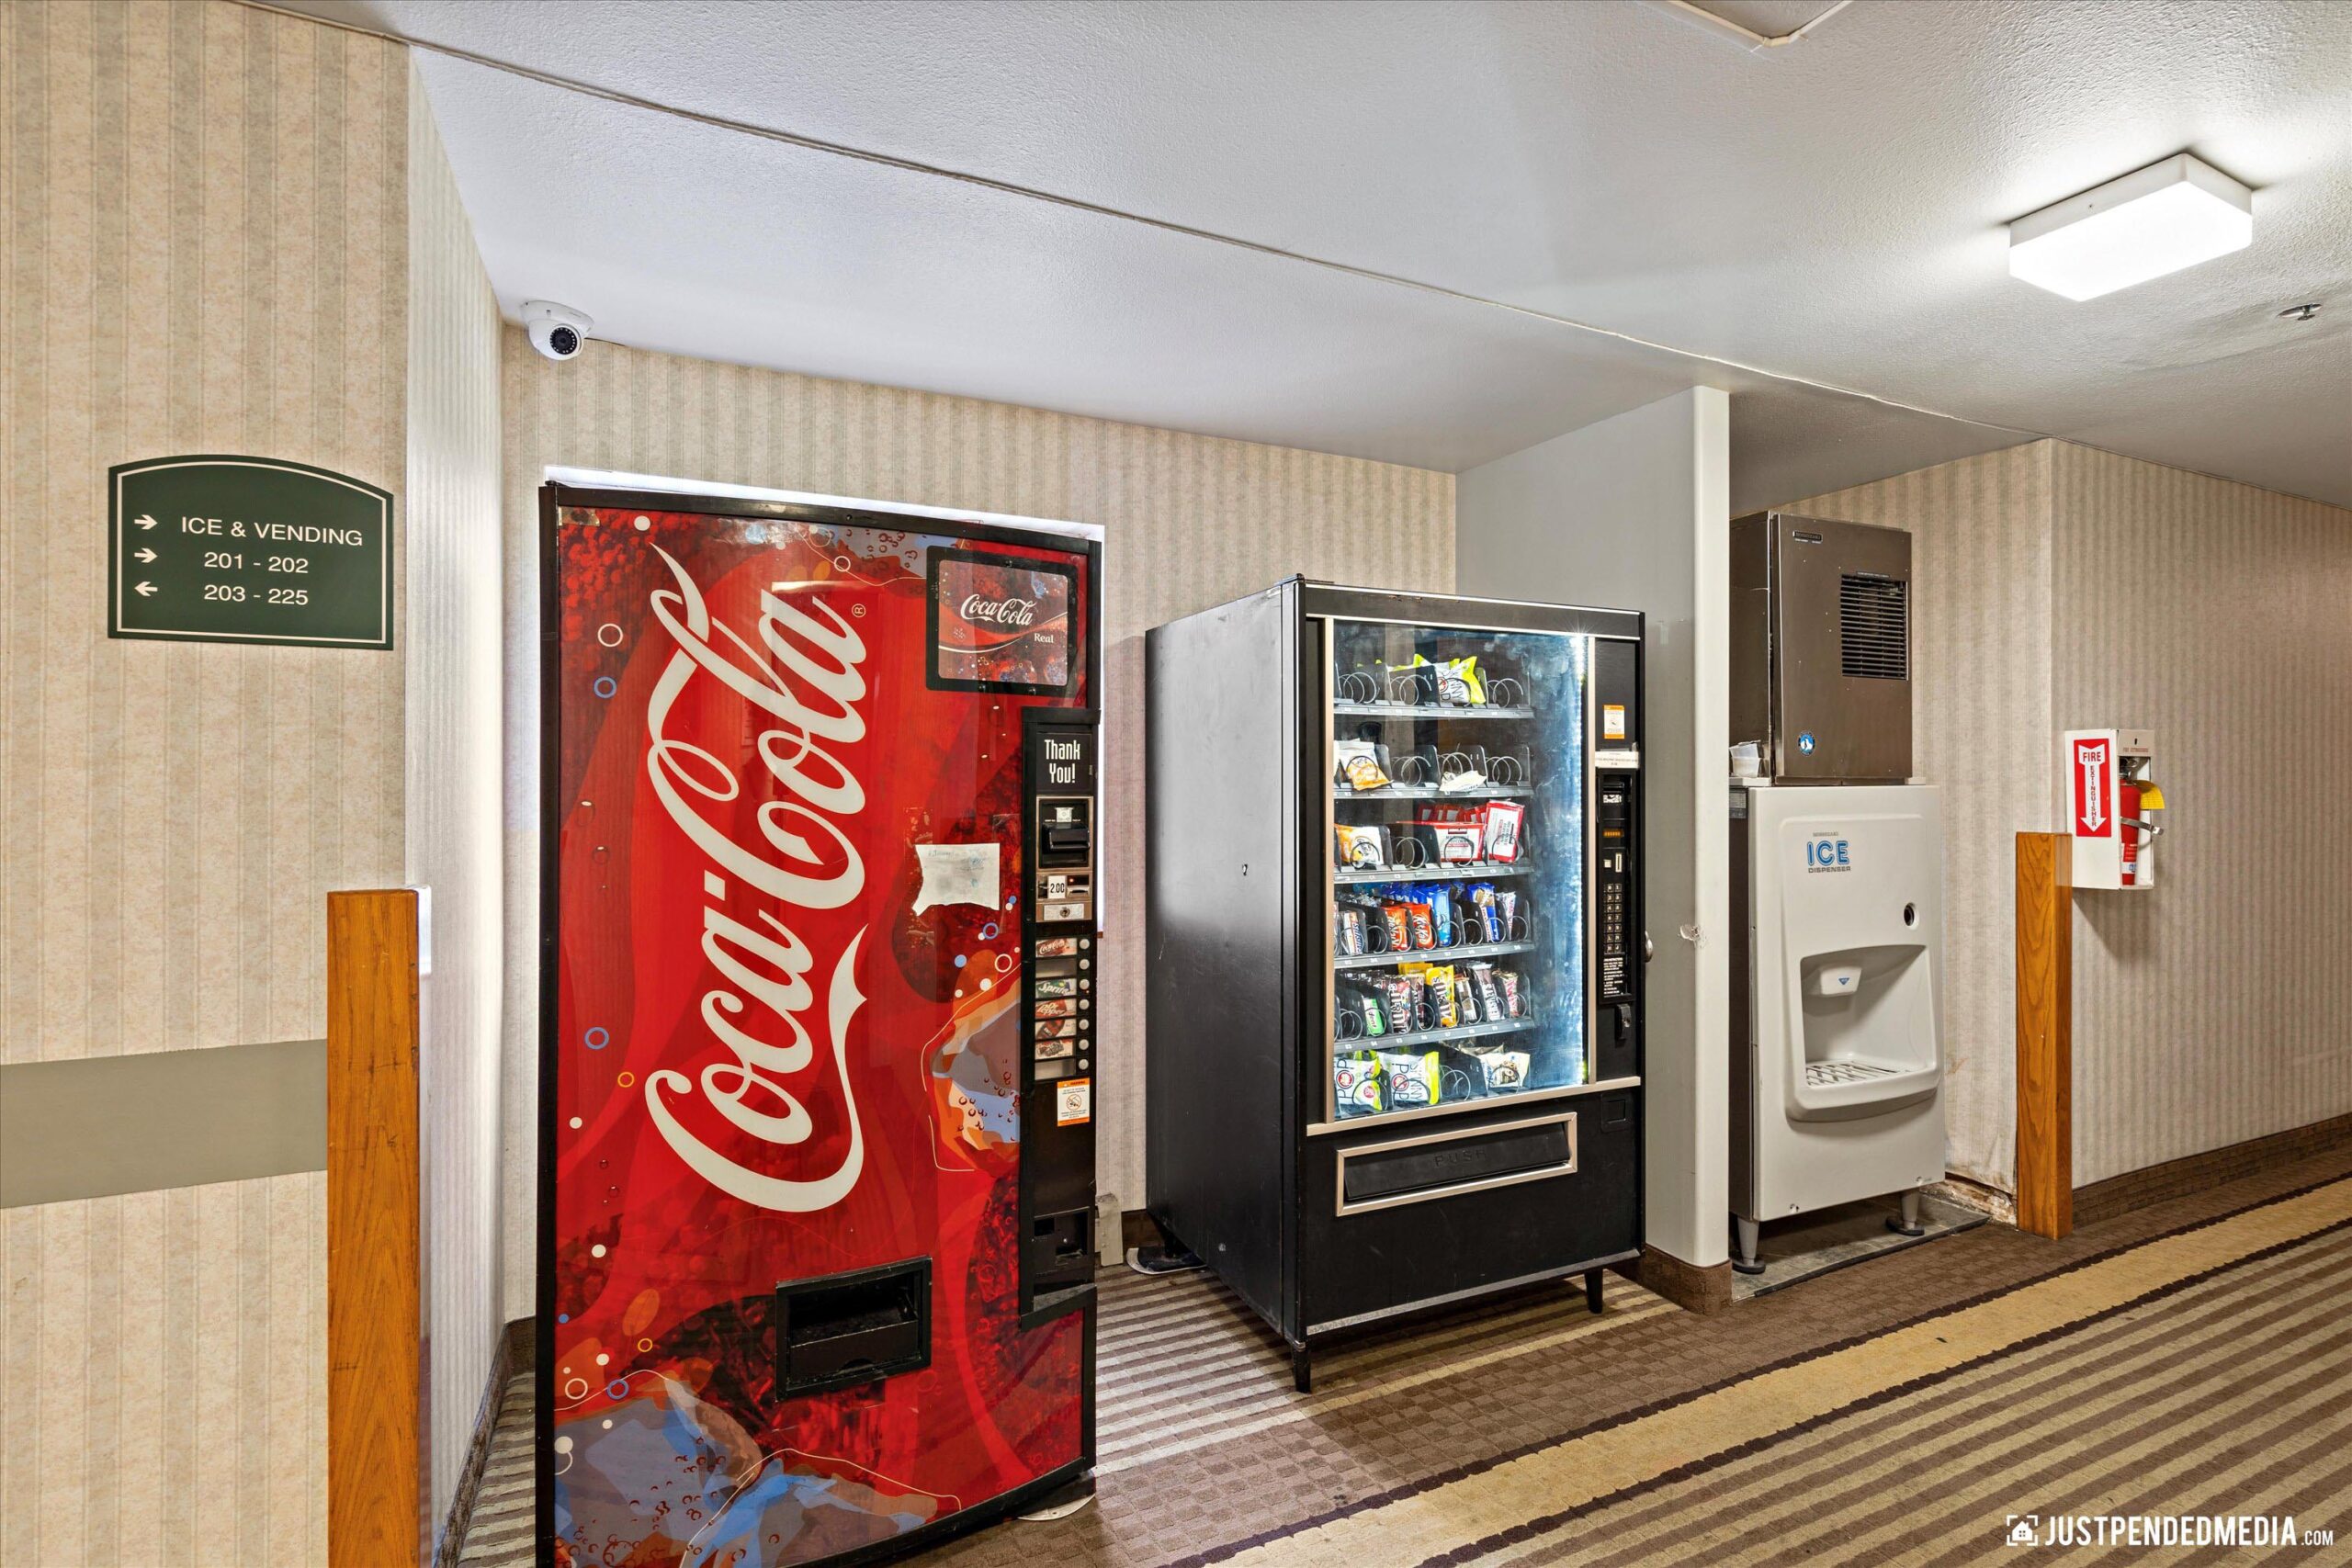 Interior lobby of The Guesthouse with an ice machine and two vending machines